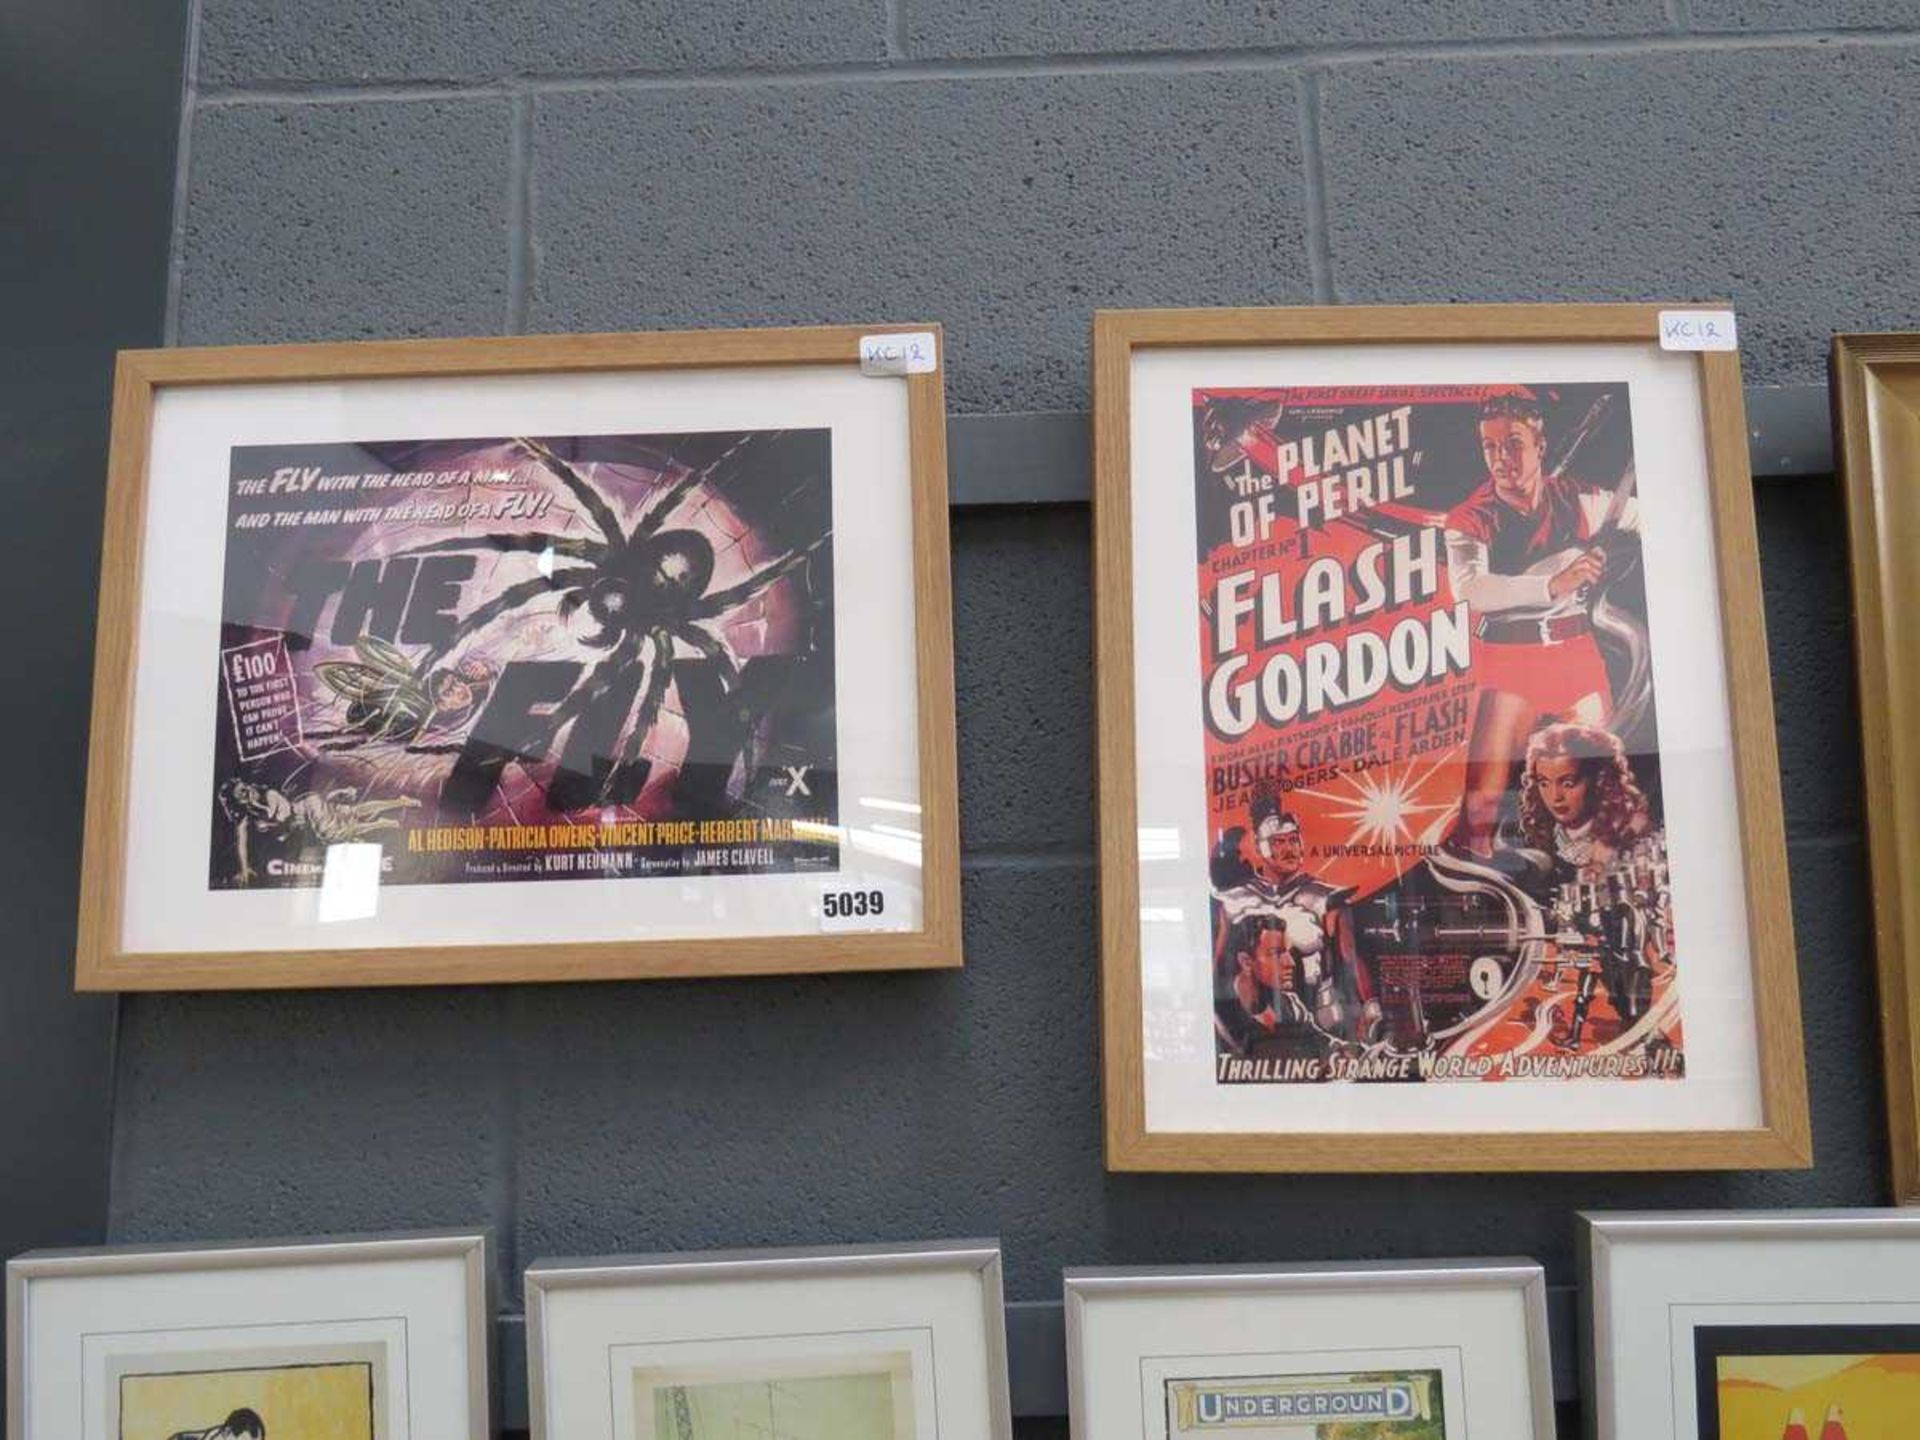 2 movie posters of 'The Fly' and 'Flash Gordan'